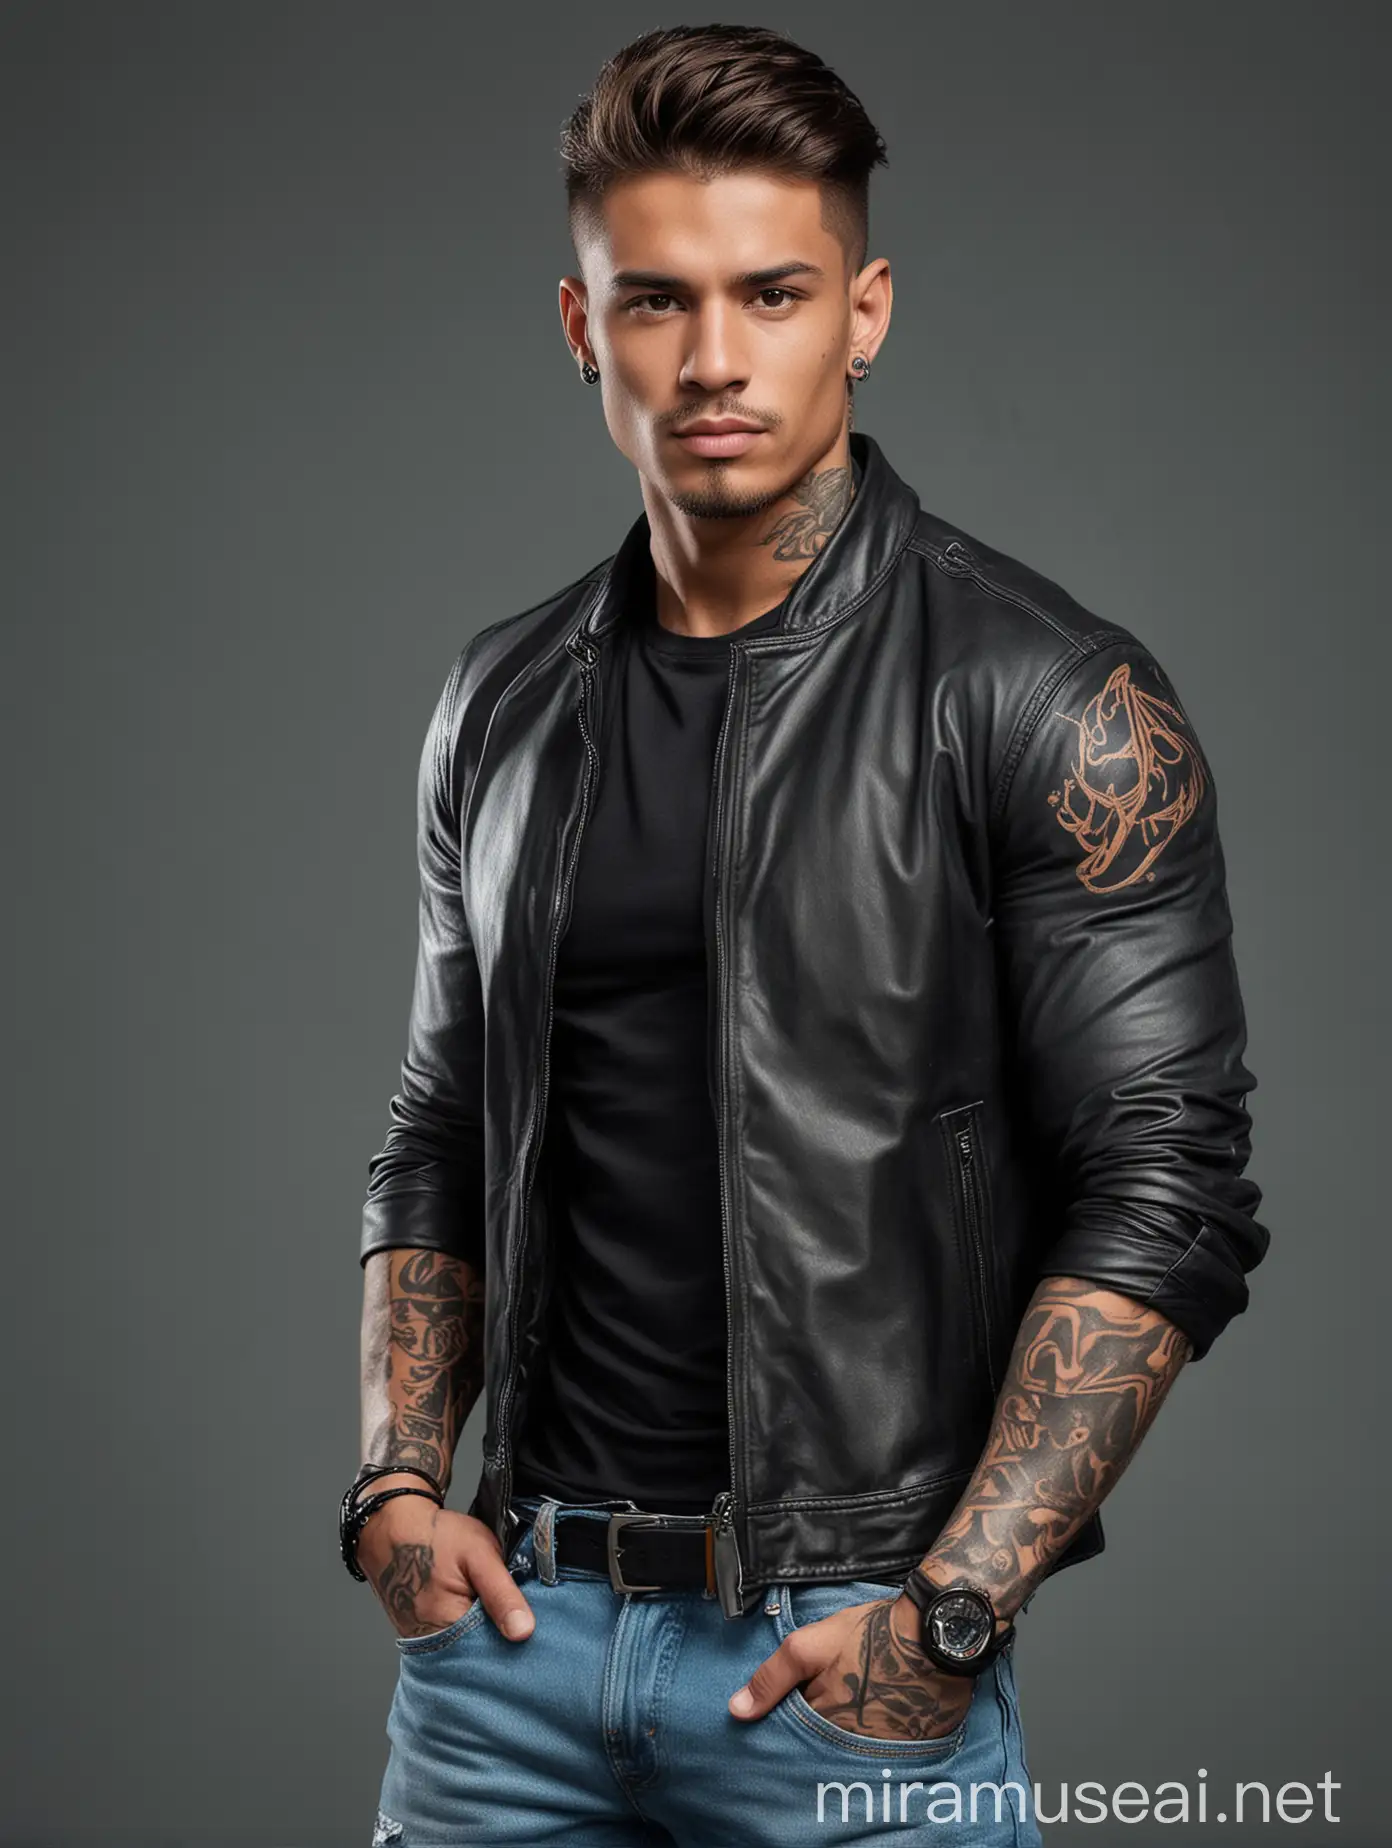 Muscular Latino Man with Tattoos in Black Leather Jacket and Jeans